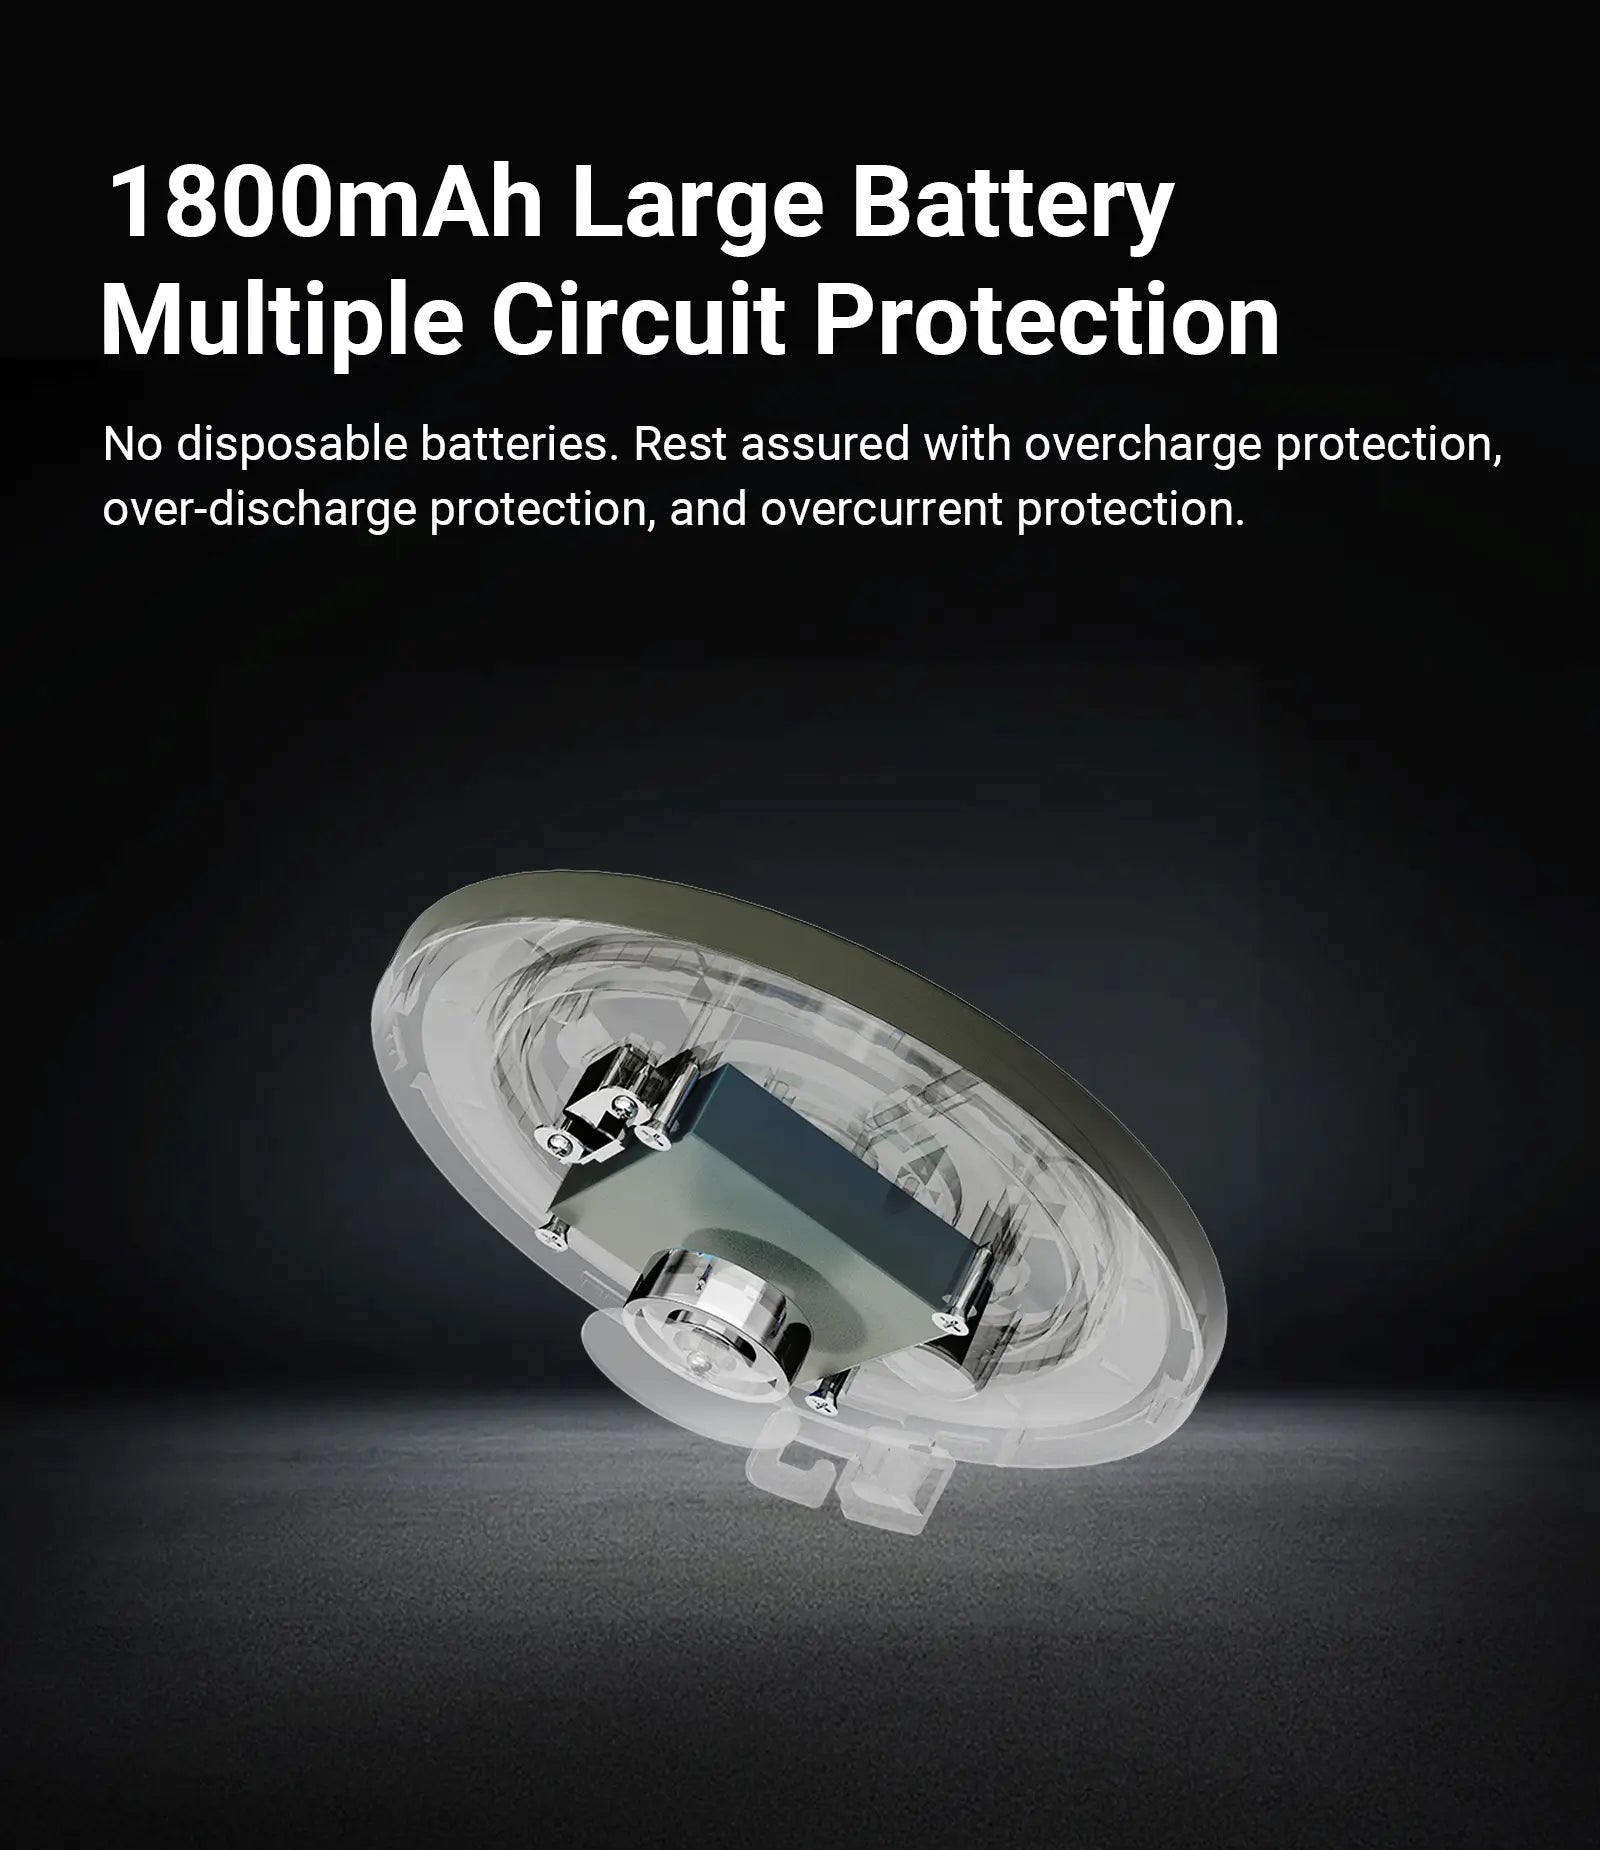 1800mAh Large Battery Multiple Circuit Protection